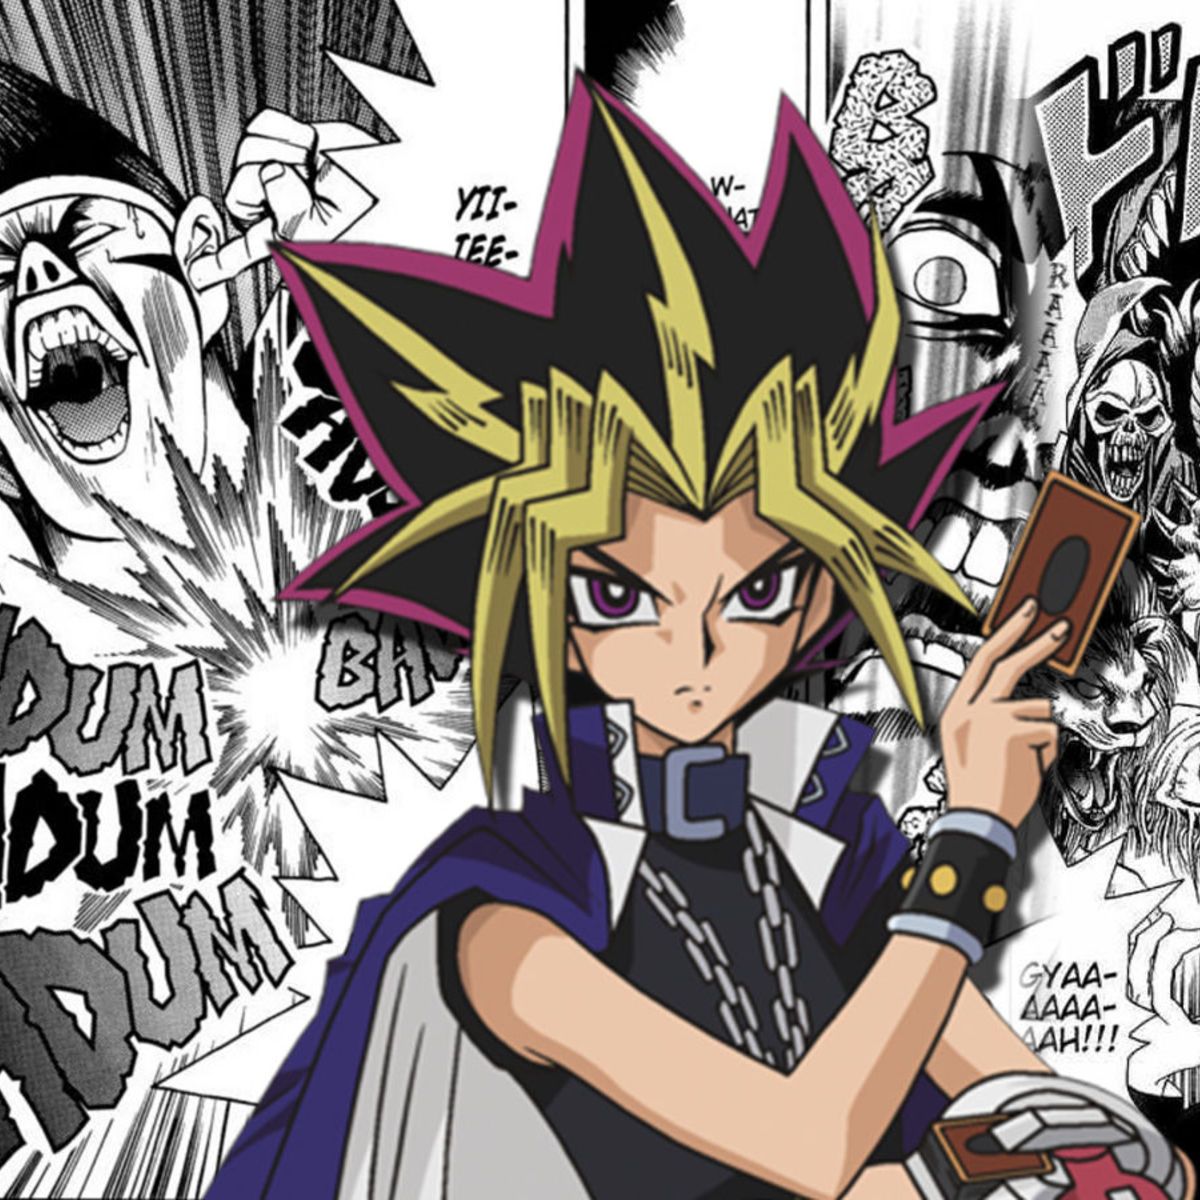 The Yu Gi Oh! Manga Is Much More Dark And Insane Than You Might Think